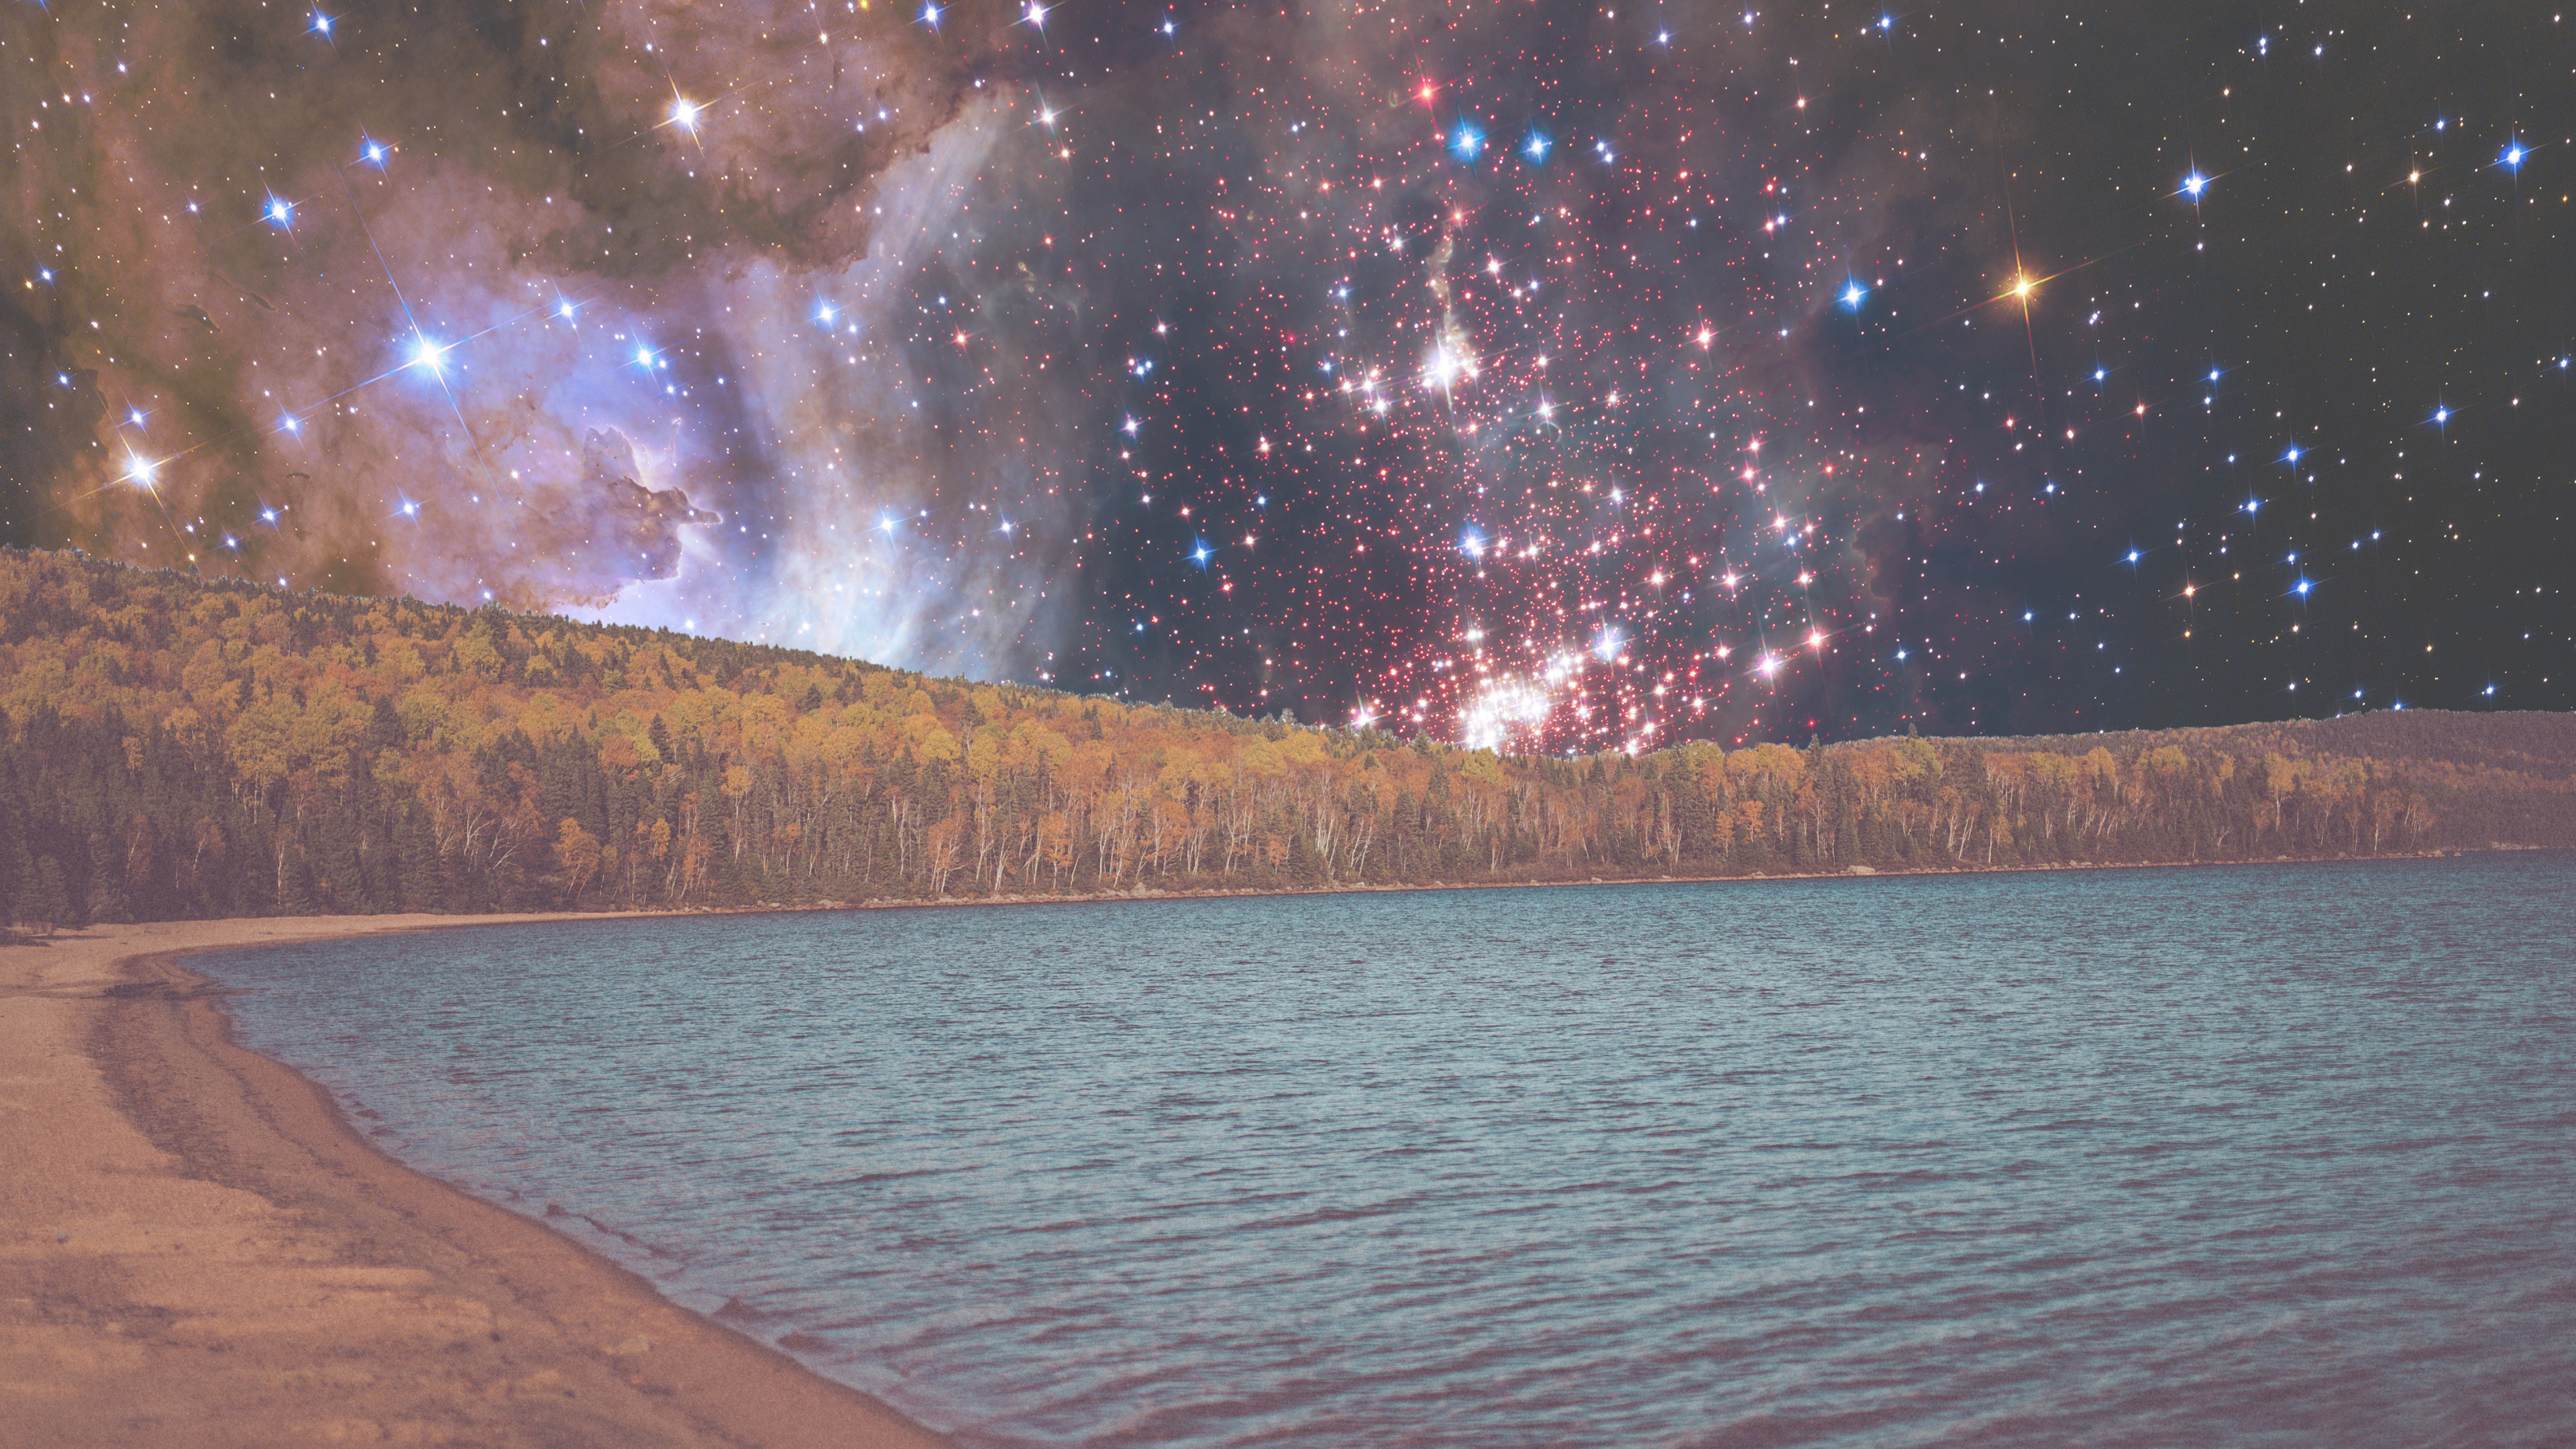 lake, Landscape, Space, Constellations Wallpaper